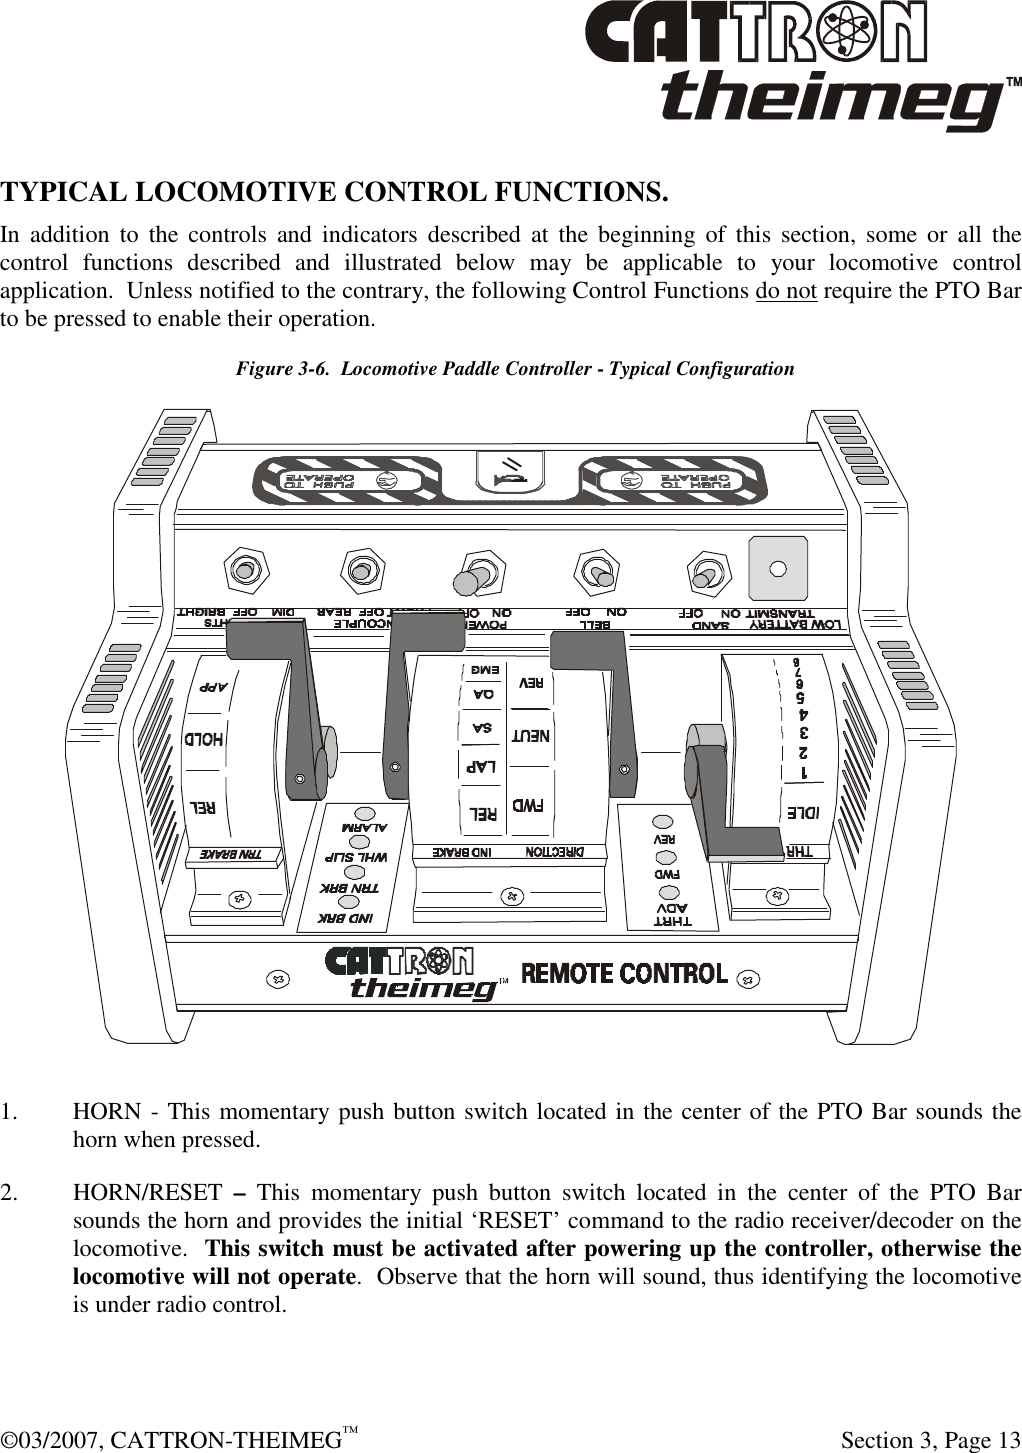  ©03/2007, CATTRON-THEIMEG™     Section 3, Page 13 TYPICAL LOCOMOTIVE CONTROL FUNCTIONS.  In  addition  to  the  controls  and  indicators  described  at  the beginning  of  this  section,  some or  all  the control  functions  described  and  illustrated  below  may  be  applicable  to  your  locomotive  control application.  Unless notified to the contrary, the following Control Functions do not require the PTO Bar to be pressed to enable their operation.     Figure 3-6.  Locomotive Paddle Controller - Typical Configuration  1. HORN - This momentary push button switch located in the center of the PTO Bar sounds the horn when pressed. 2. HORN/RESET  –  This  momentary  push  button  switch located  in  the  center  of  the  PTO  Bar sounds the horn and provides the initial ‘RESET’ command to the radio receiver/decoder on the locomotive.  This switch must be activated after powering up the controller, otherwise the locomotive will not operate.  Observe that the horn will sound, thus identifying the locomotive is under radio control. 